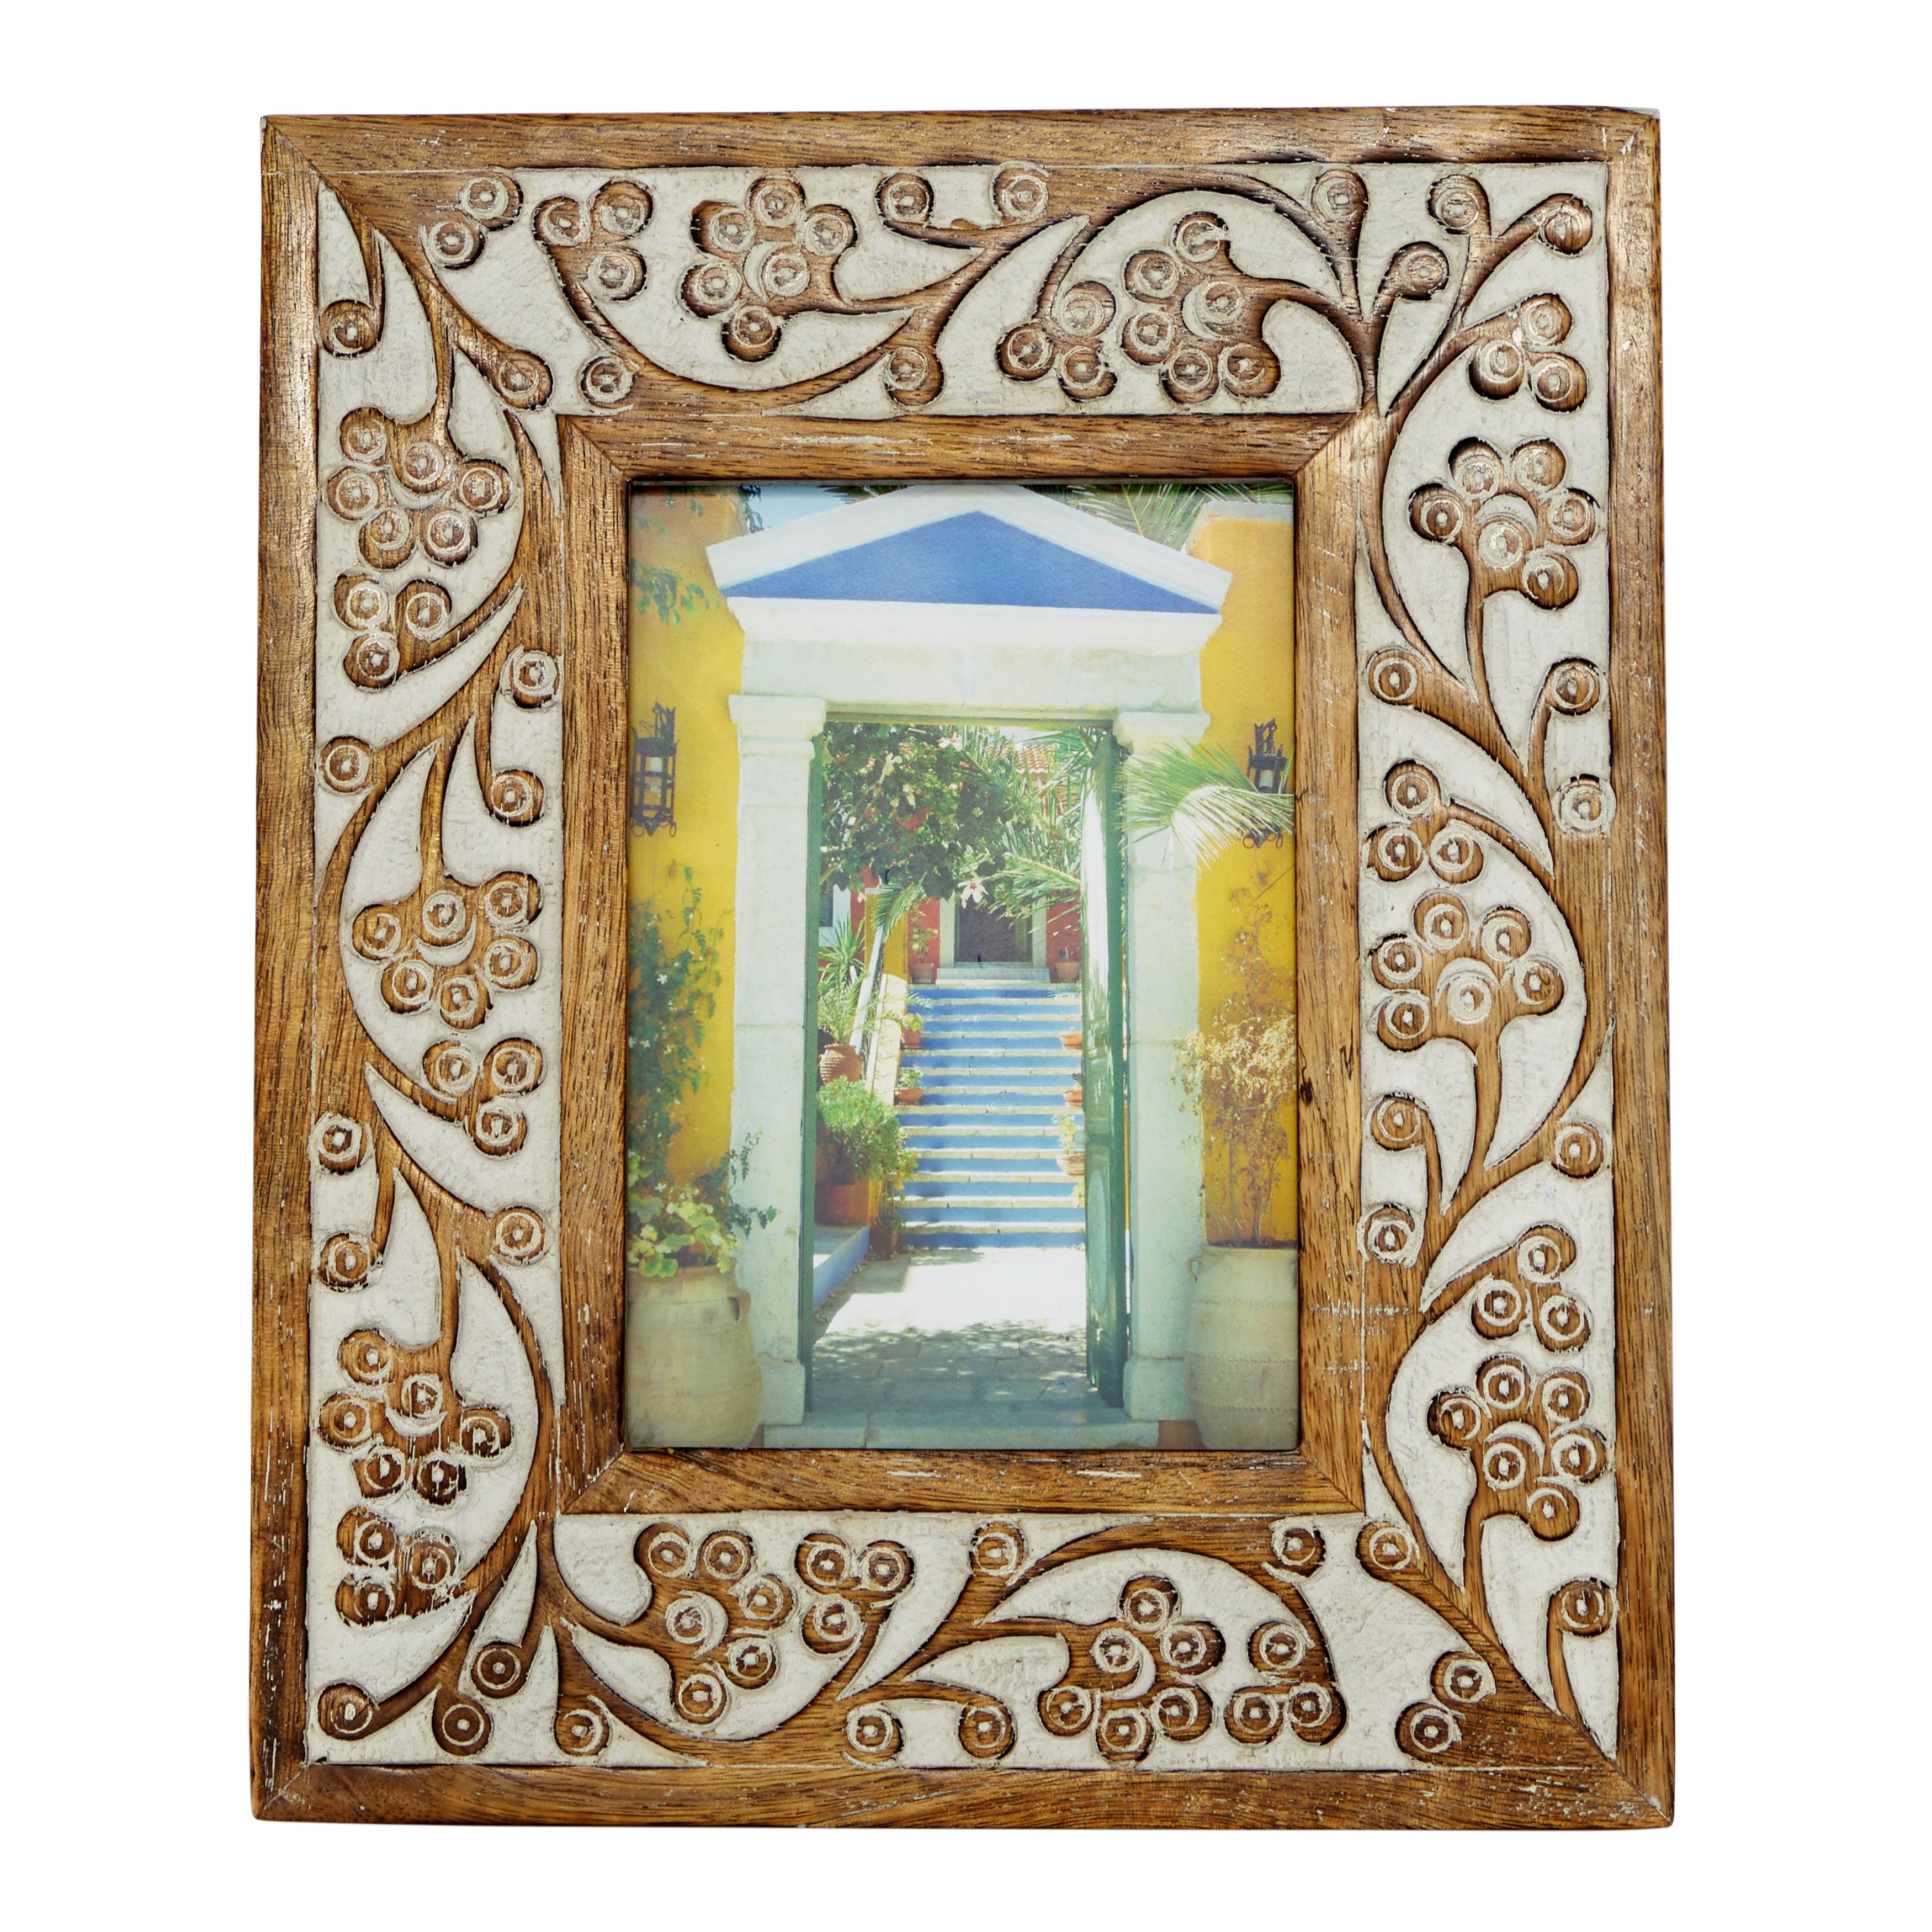 Deco 79 Rectangular Carved Wood Antique Floral Picture Frame w/ Whitewash Finish 8.5” x 10” 54644 Brown 